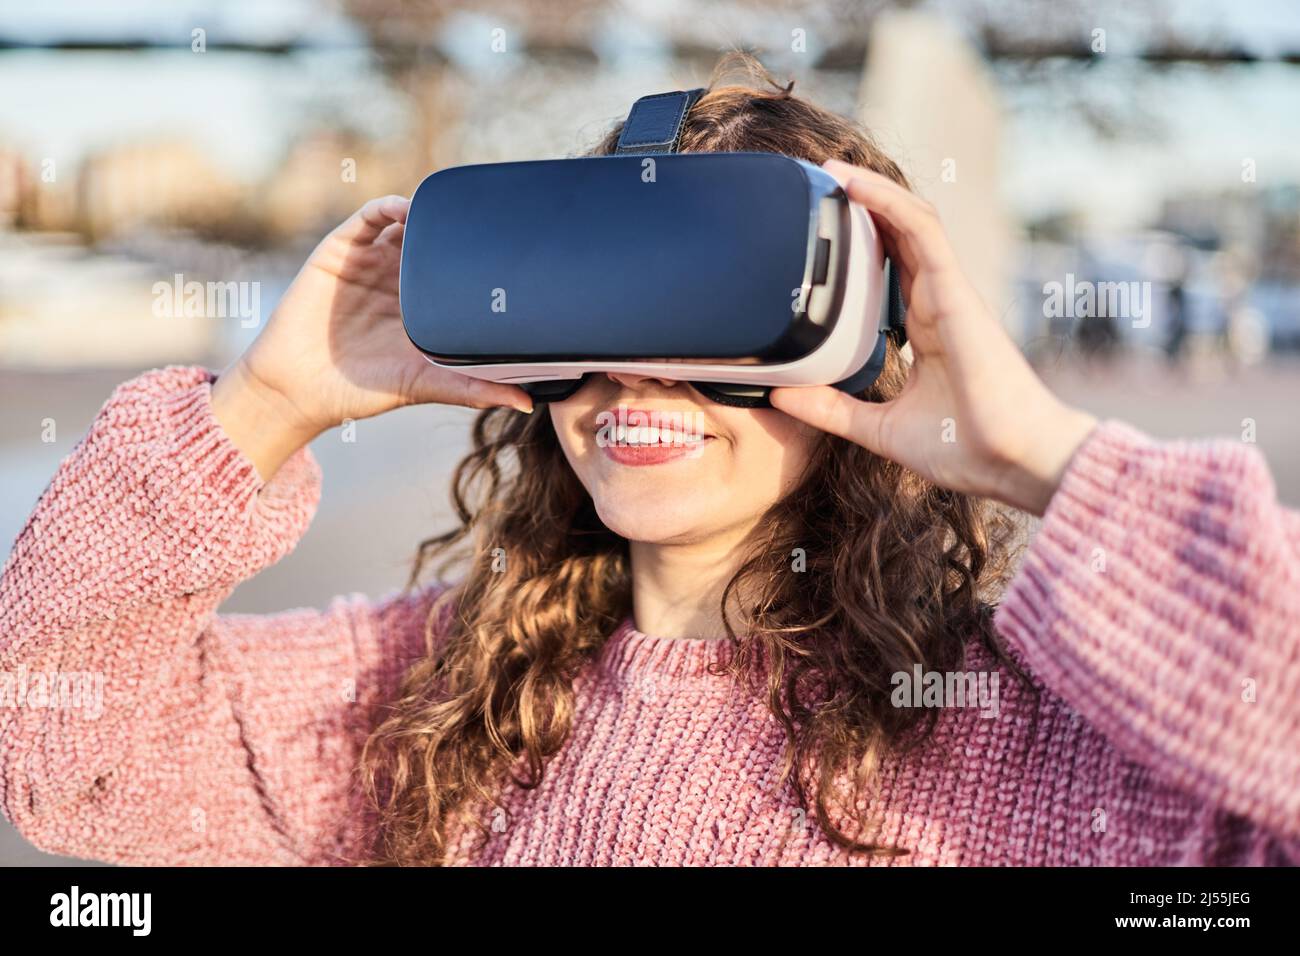 Young girl with VR goggles ready to enter the virtual world. Concept of metaverse. Stock Photo